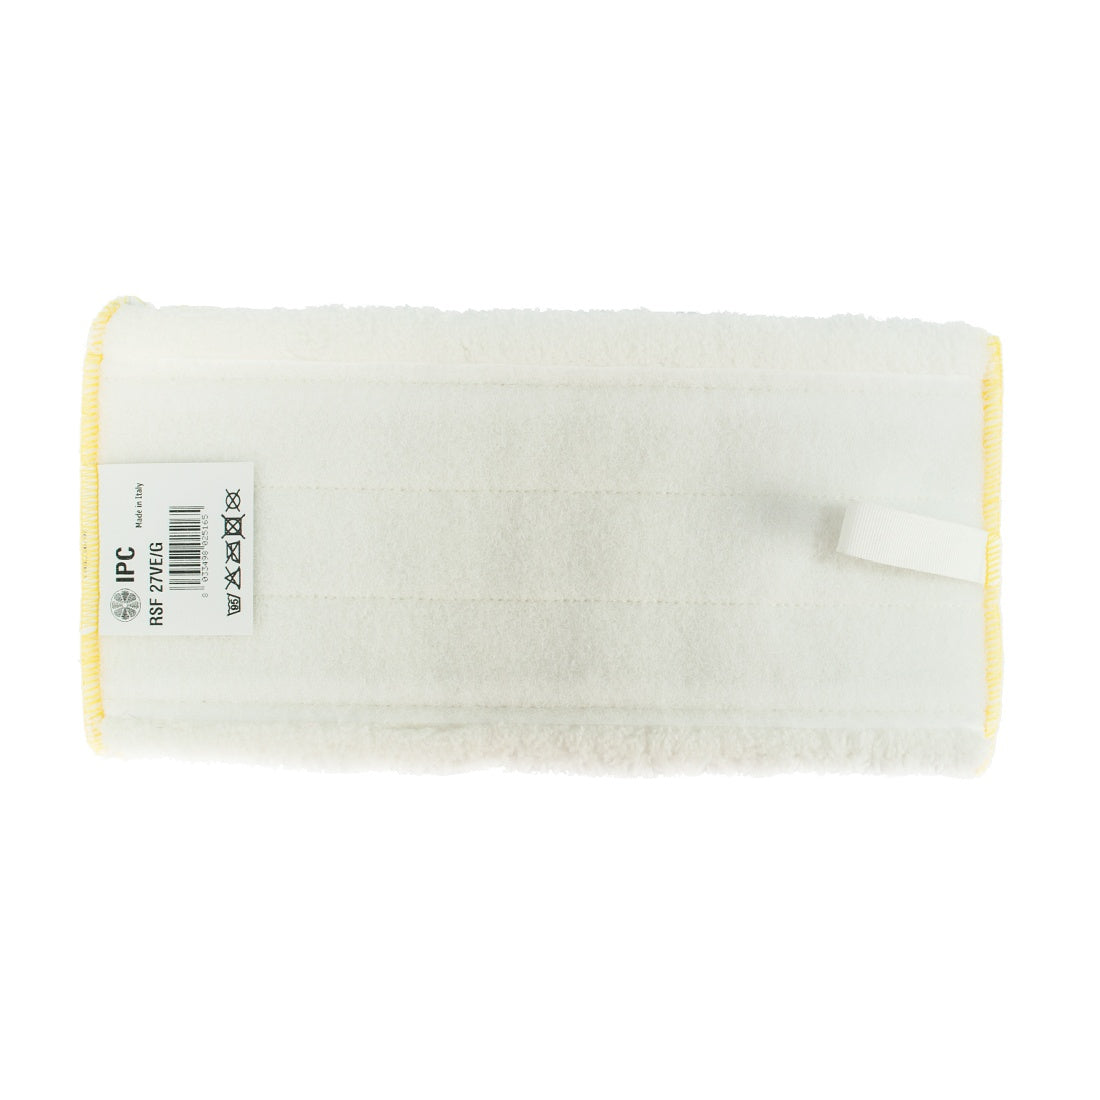 IPC Eagle Coloured Soft Pad Yellow Top View